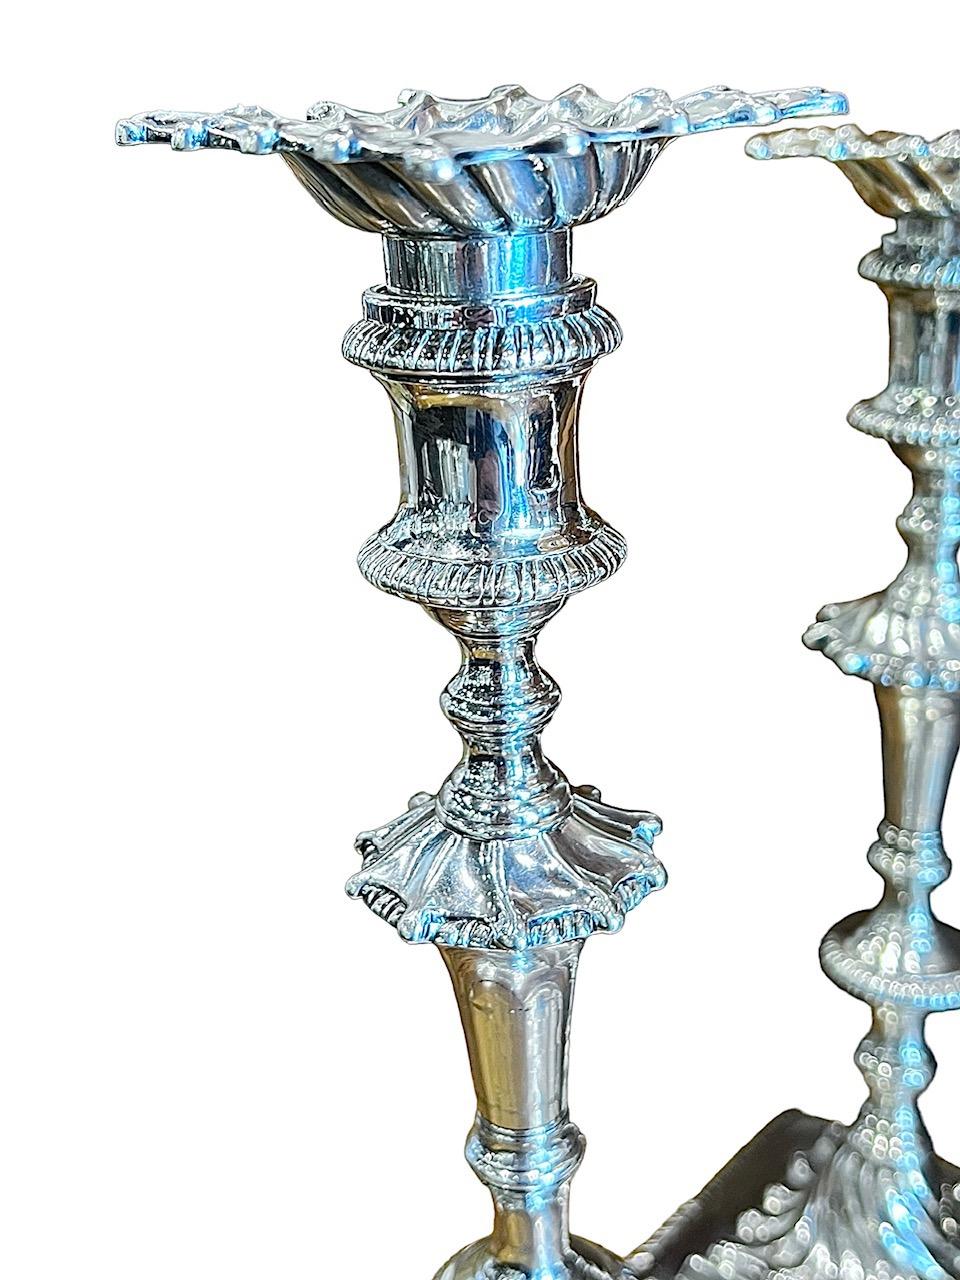 1763 Pair of George III Sterling Silver Candlesticks by William Cafe, English 11